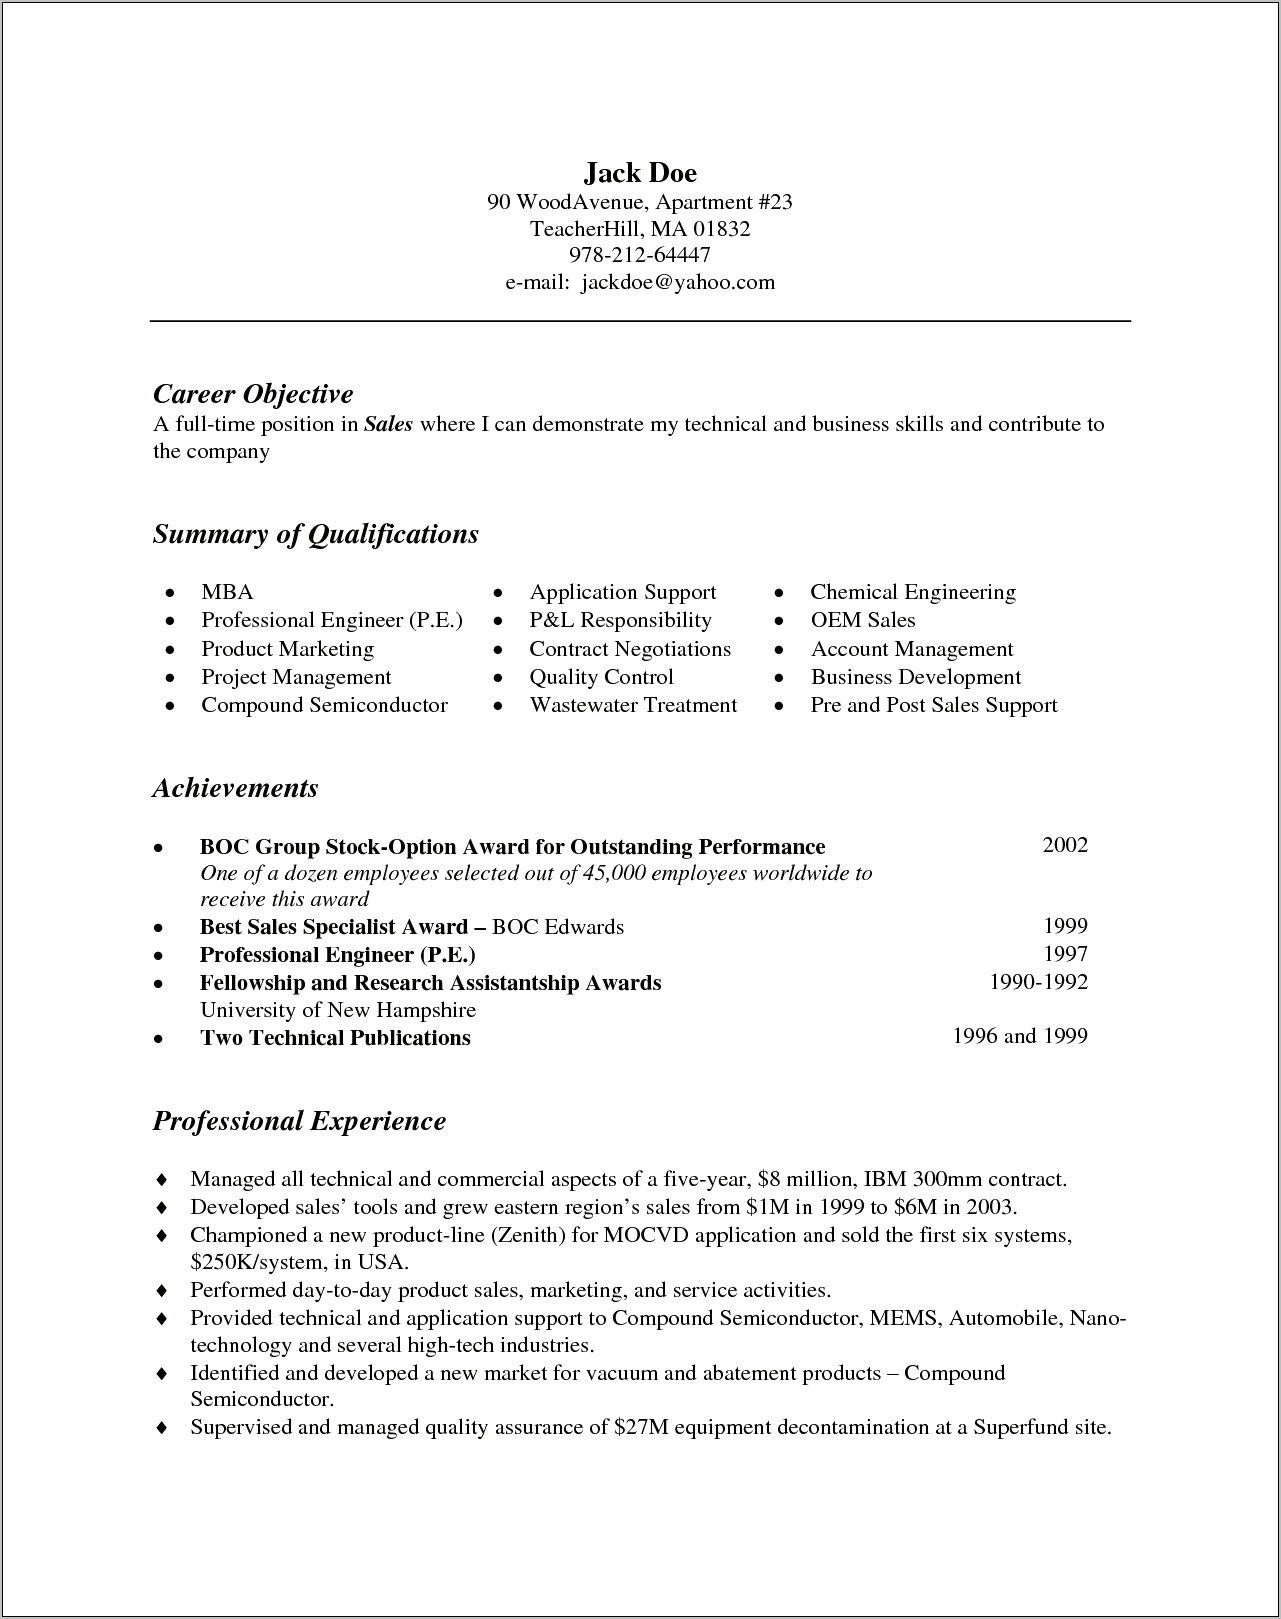 Should I Bullet My Experiences In My Resume